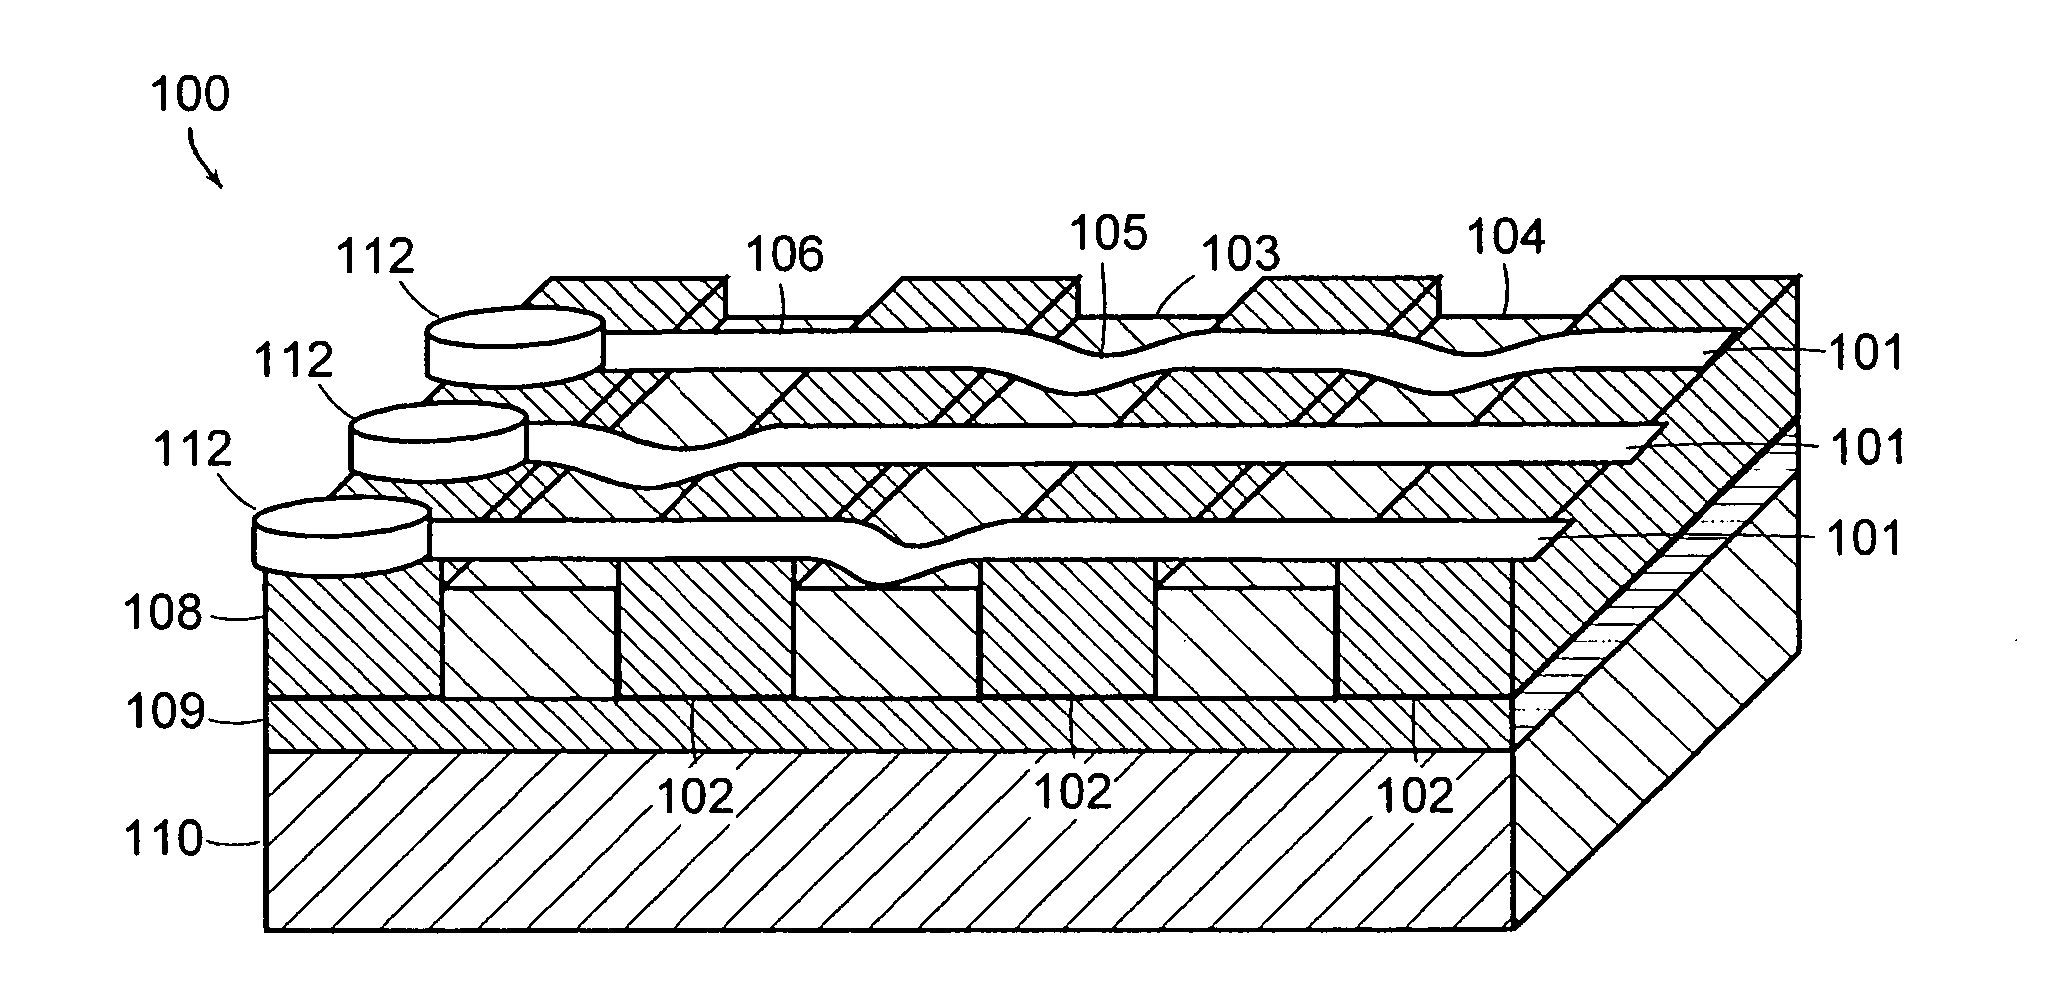 Device selection circuitry constructed with nanotube technology